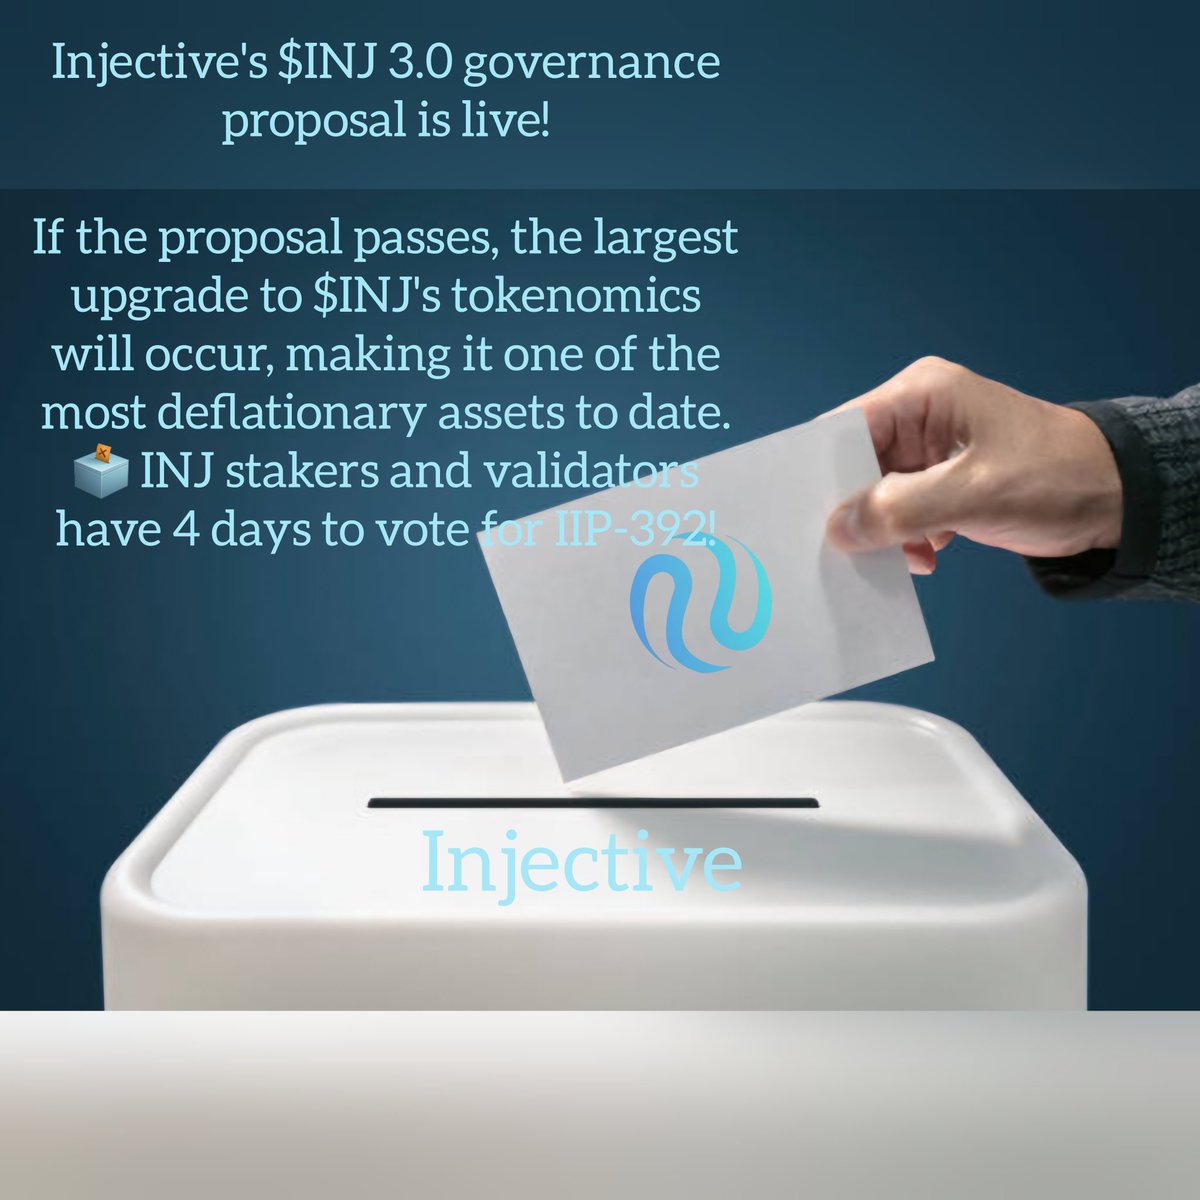 Let's vote! #Injective #crypto #bitcoin    #cryptocurrency #blockchain #ethereum #btc    #forex #trading #money #cryptonews #cryptotrading #bitcoinmining #cryptocurrencies #investing #eth #investment #bitcoinnews #bitcoins #nft #business #invest #entrepreneur #Binance